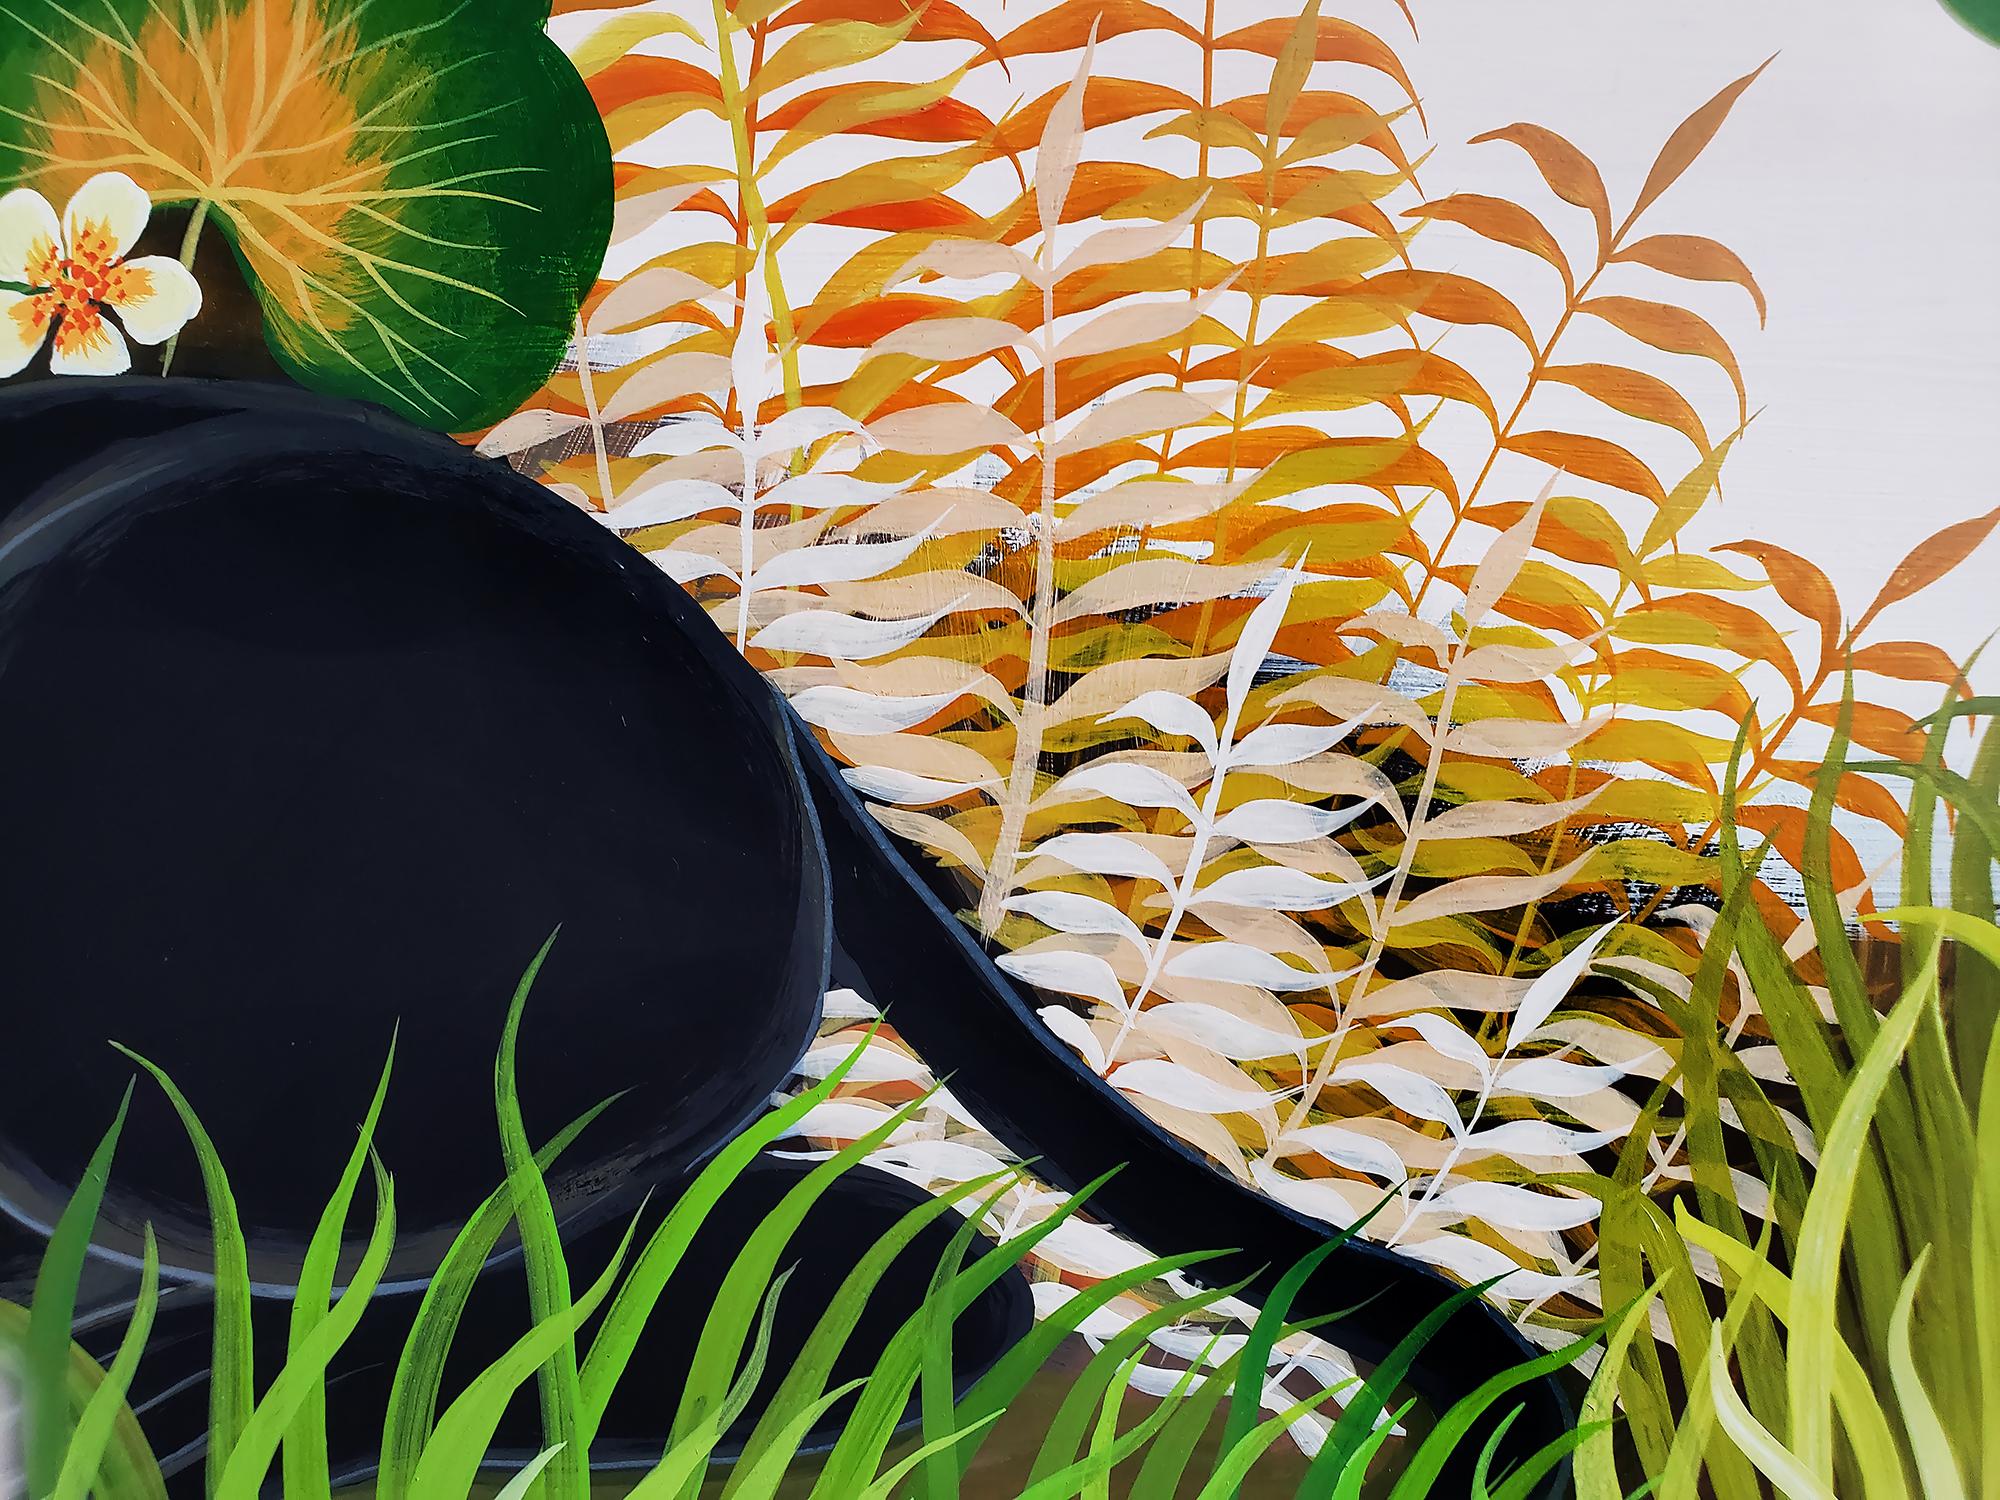 Beautiful composition of two black panthers interacting with each other.  One panther is in a tree while the other is rests in the tall grass as he gazes up.  A dreamy peach colored sky acts as in counterpoint to the green foliage. This work was